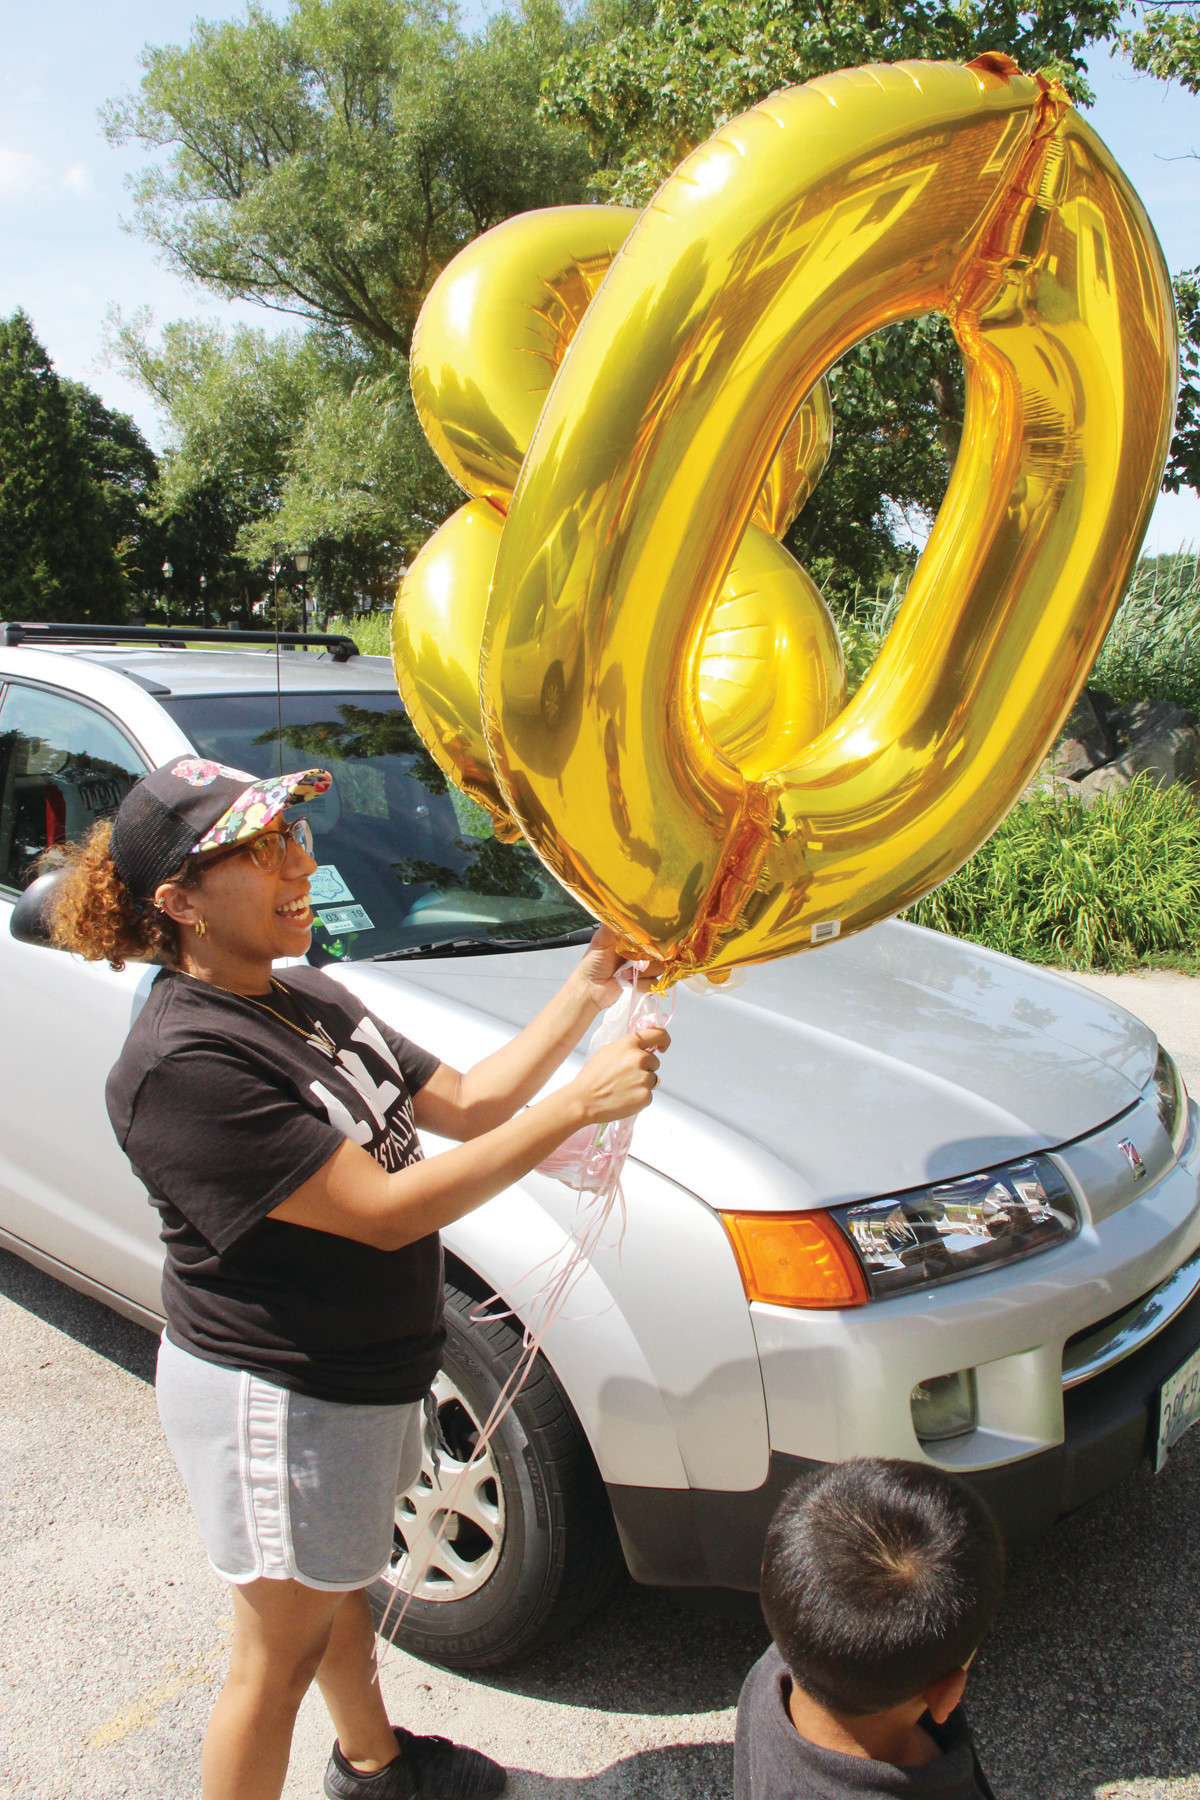 THE BIG 80: Massiel Garcia brings in balloons for the surprise 80th birthday party for Nereida Serrano held Sunday at the Aspray Boathouse in Pawtuxet.